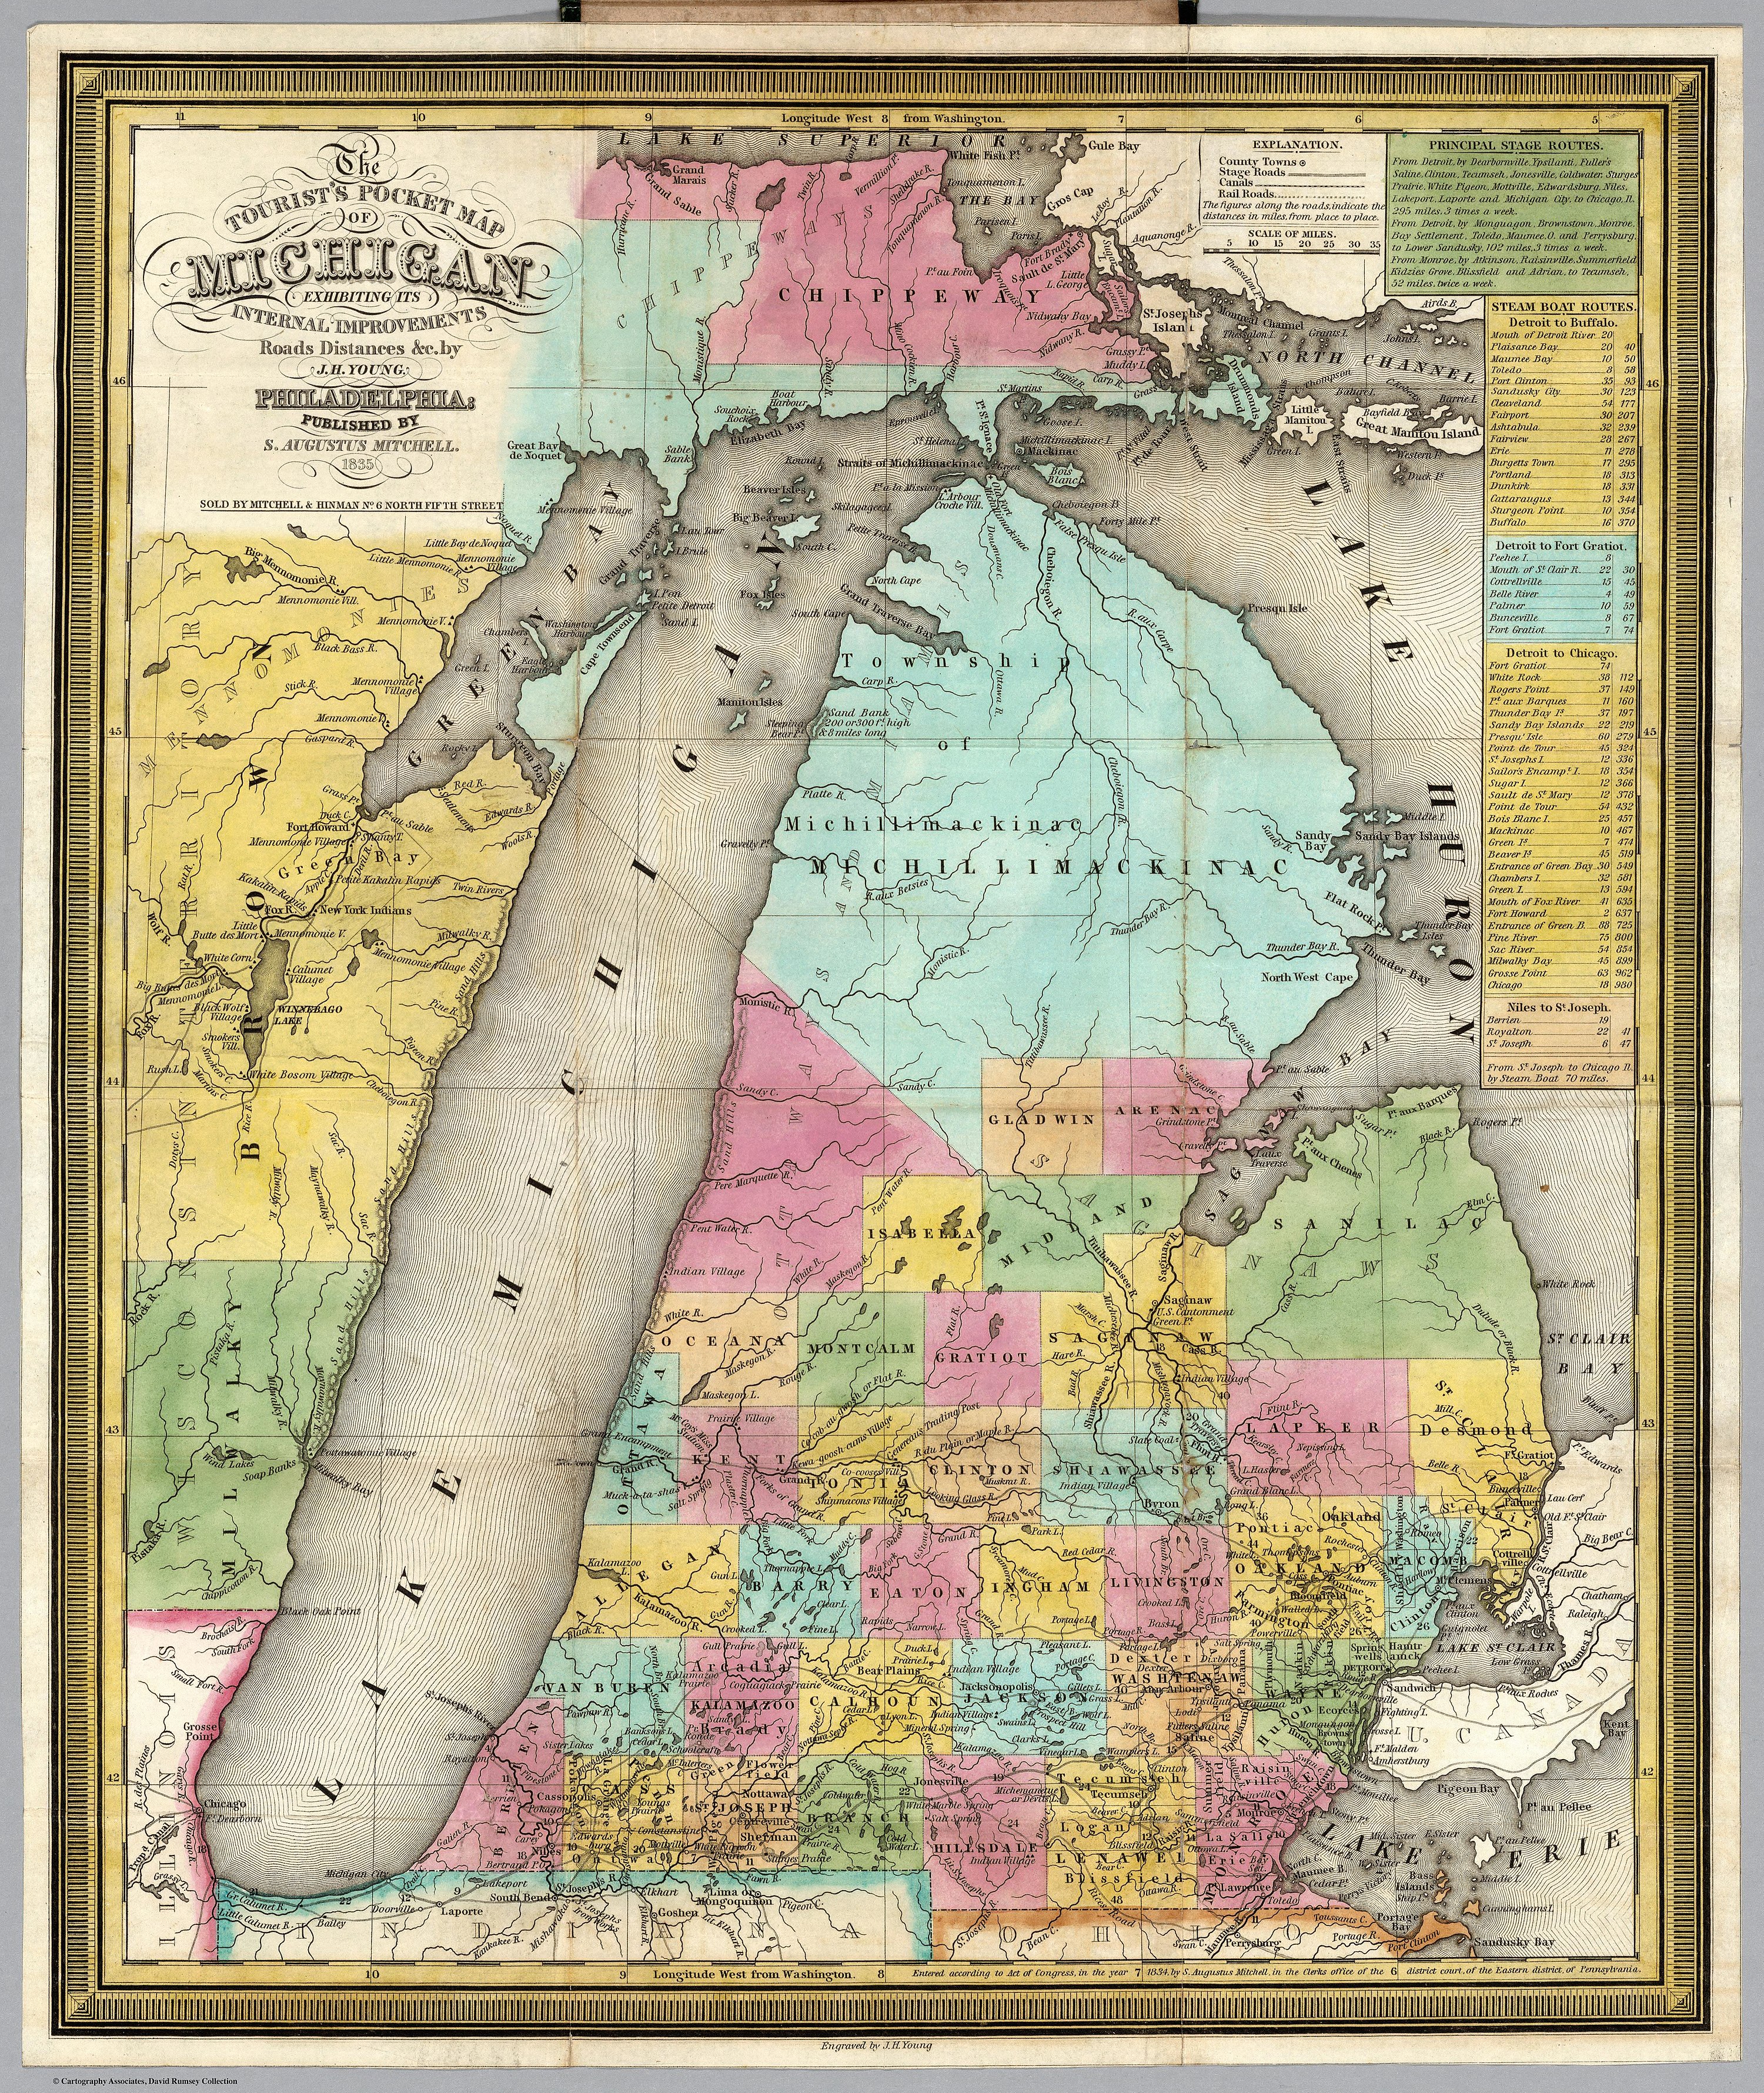 According to a historical map of Michigan originally published in 1831, the Rifle River may have previously been referred to as Grindstone Creek.[3]